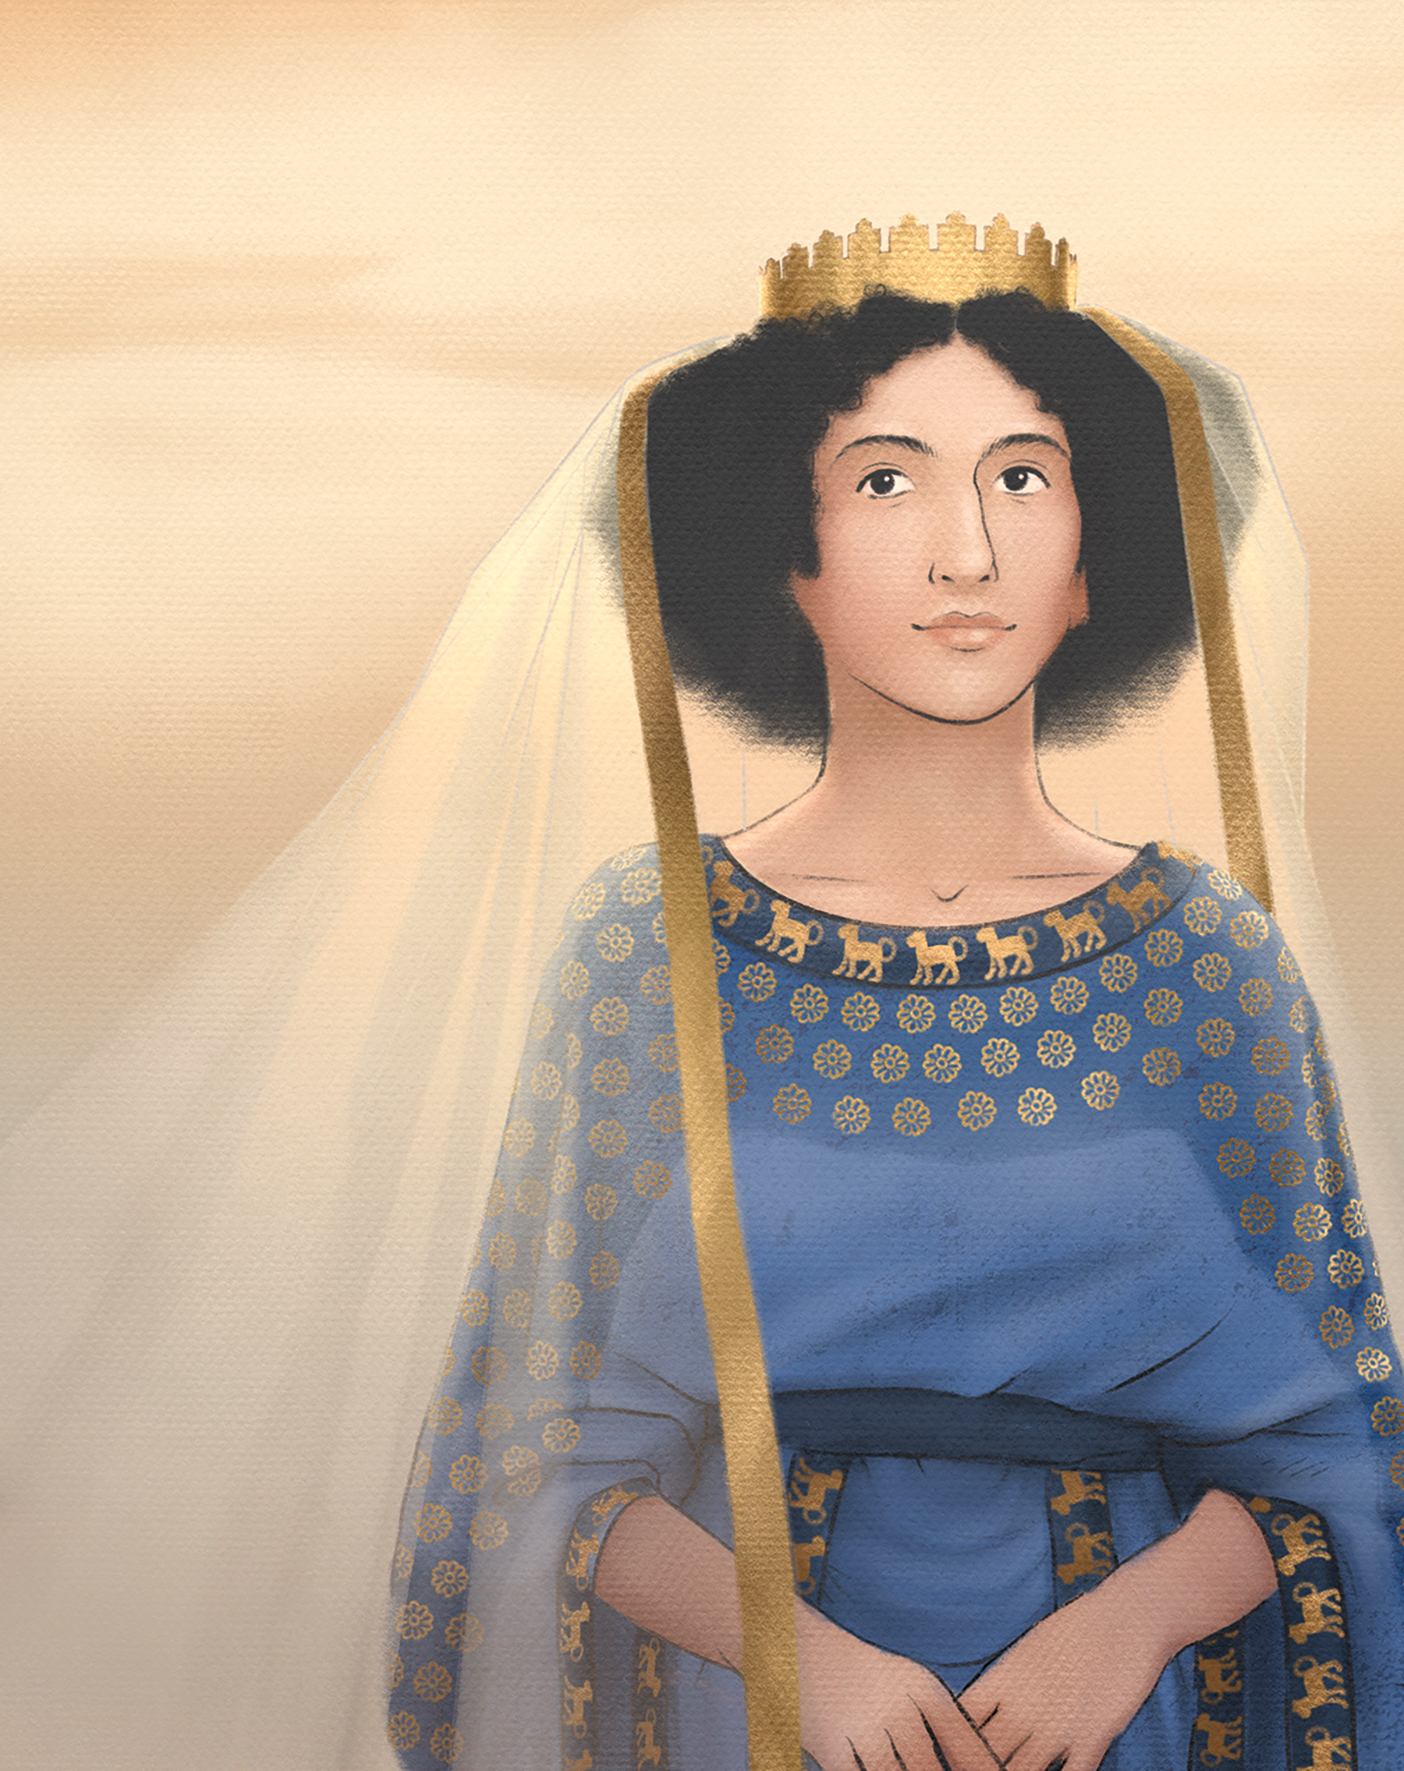 An illustration of Queen Esther from the Bible. She is wearing a crown with a veil and a blue dress.